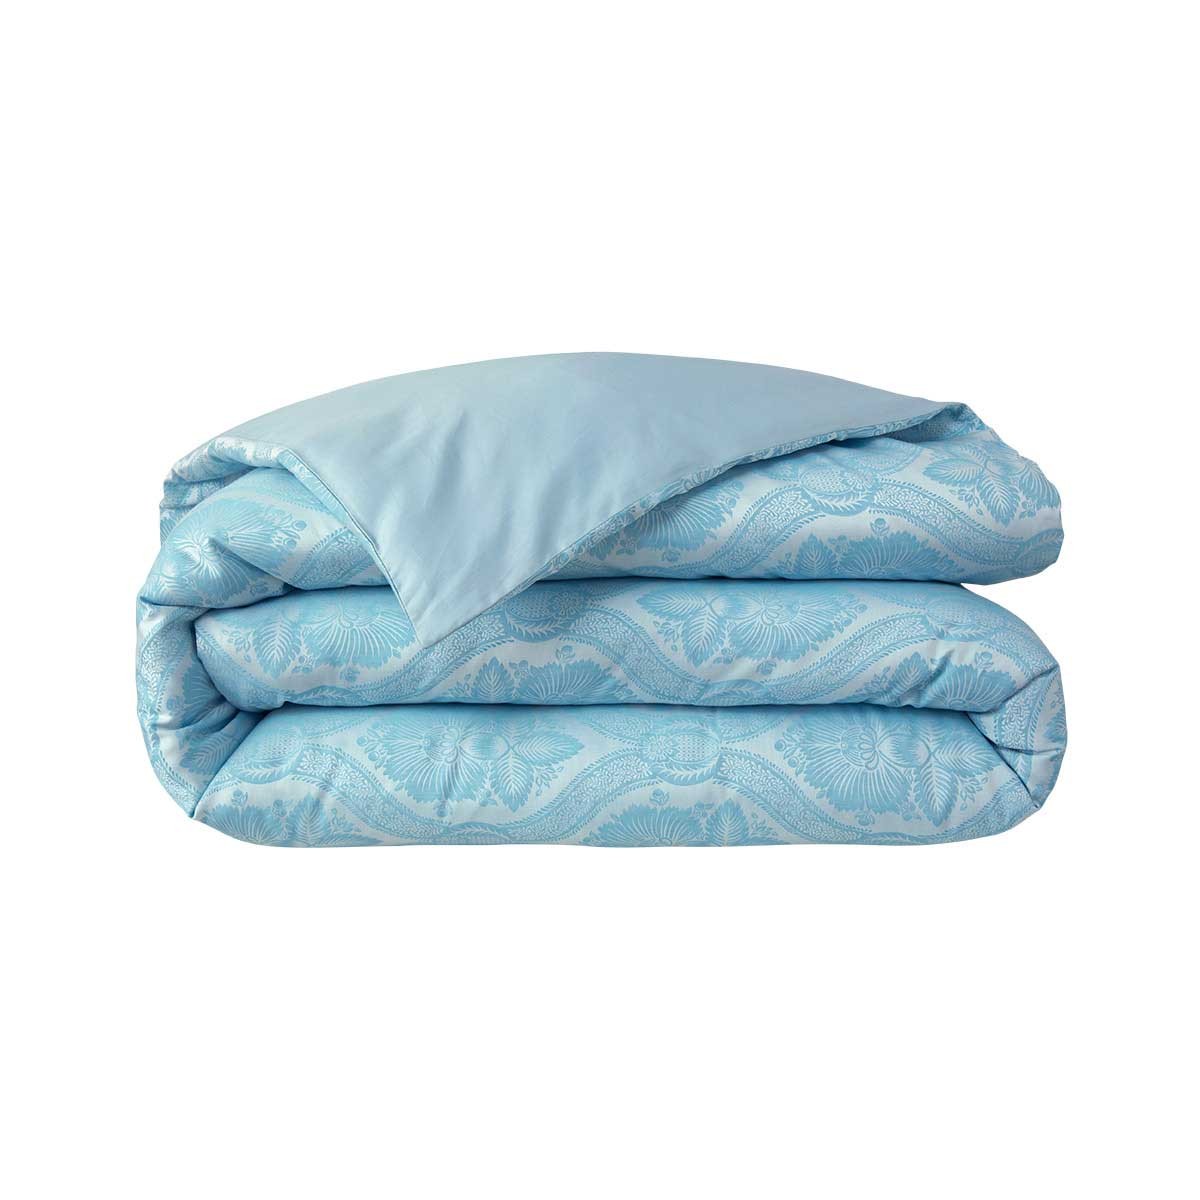 Yves Collection Nil Bleu Bed Tranquility Embrace | Delorme